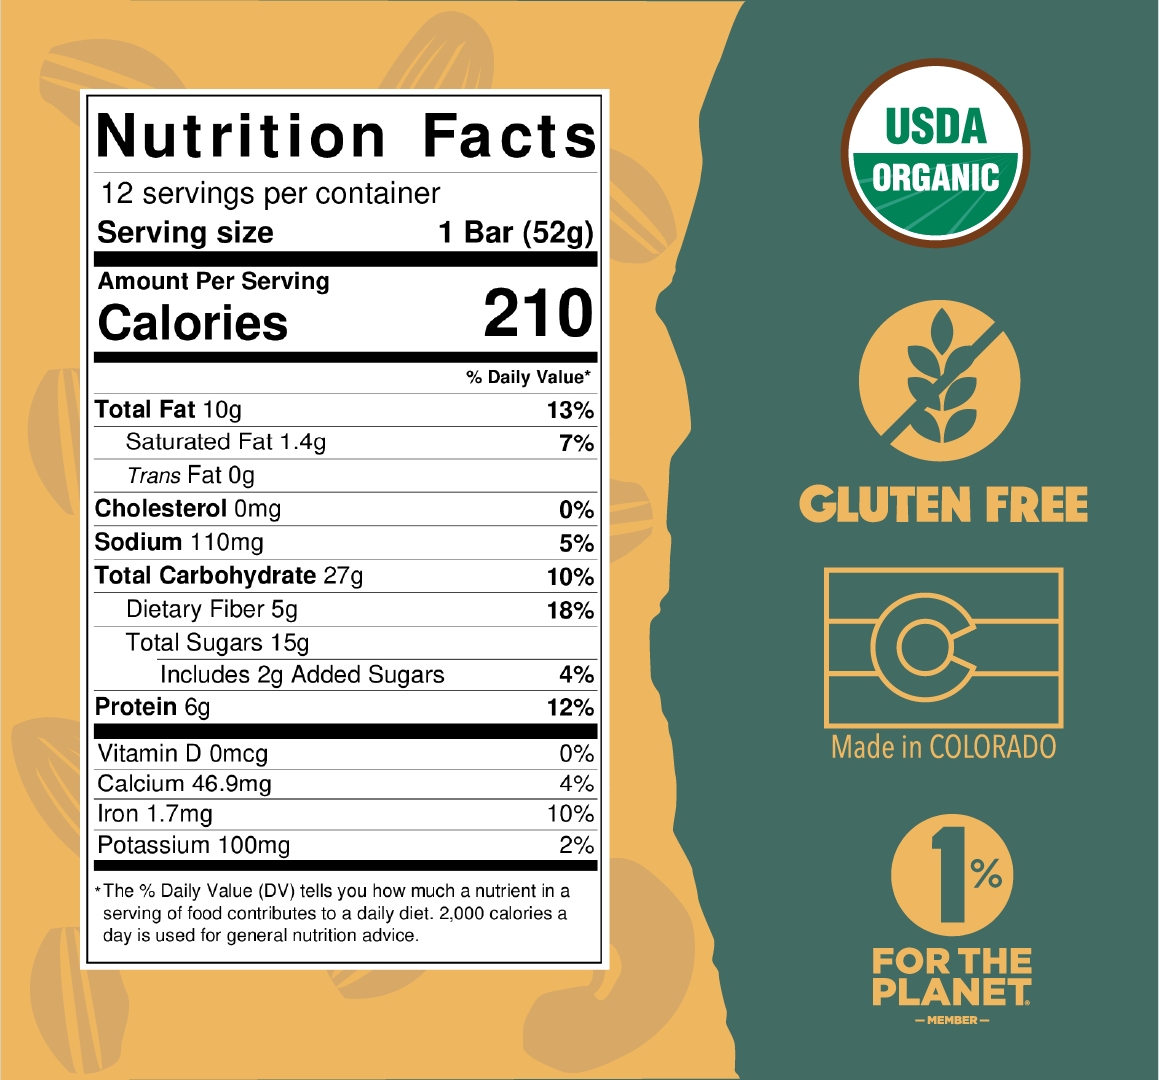 Original nutrition facts with organic certification